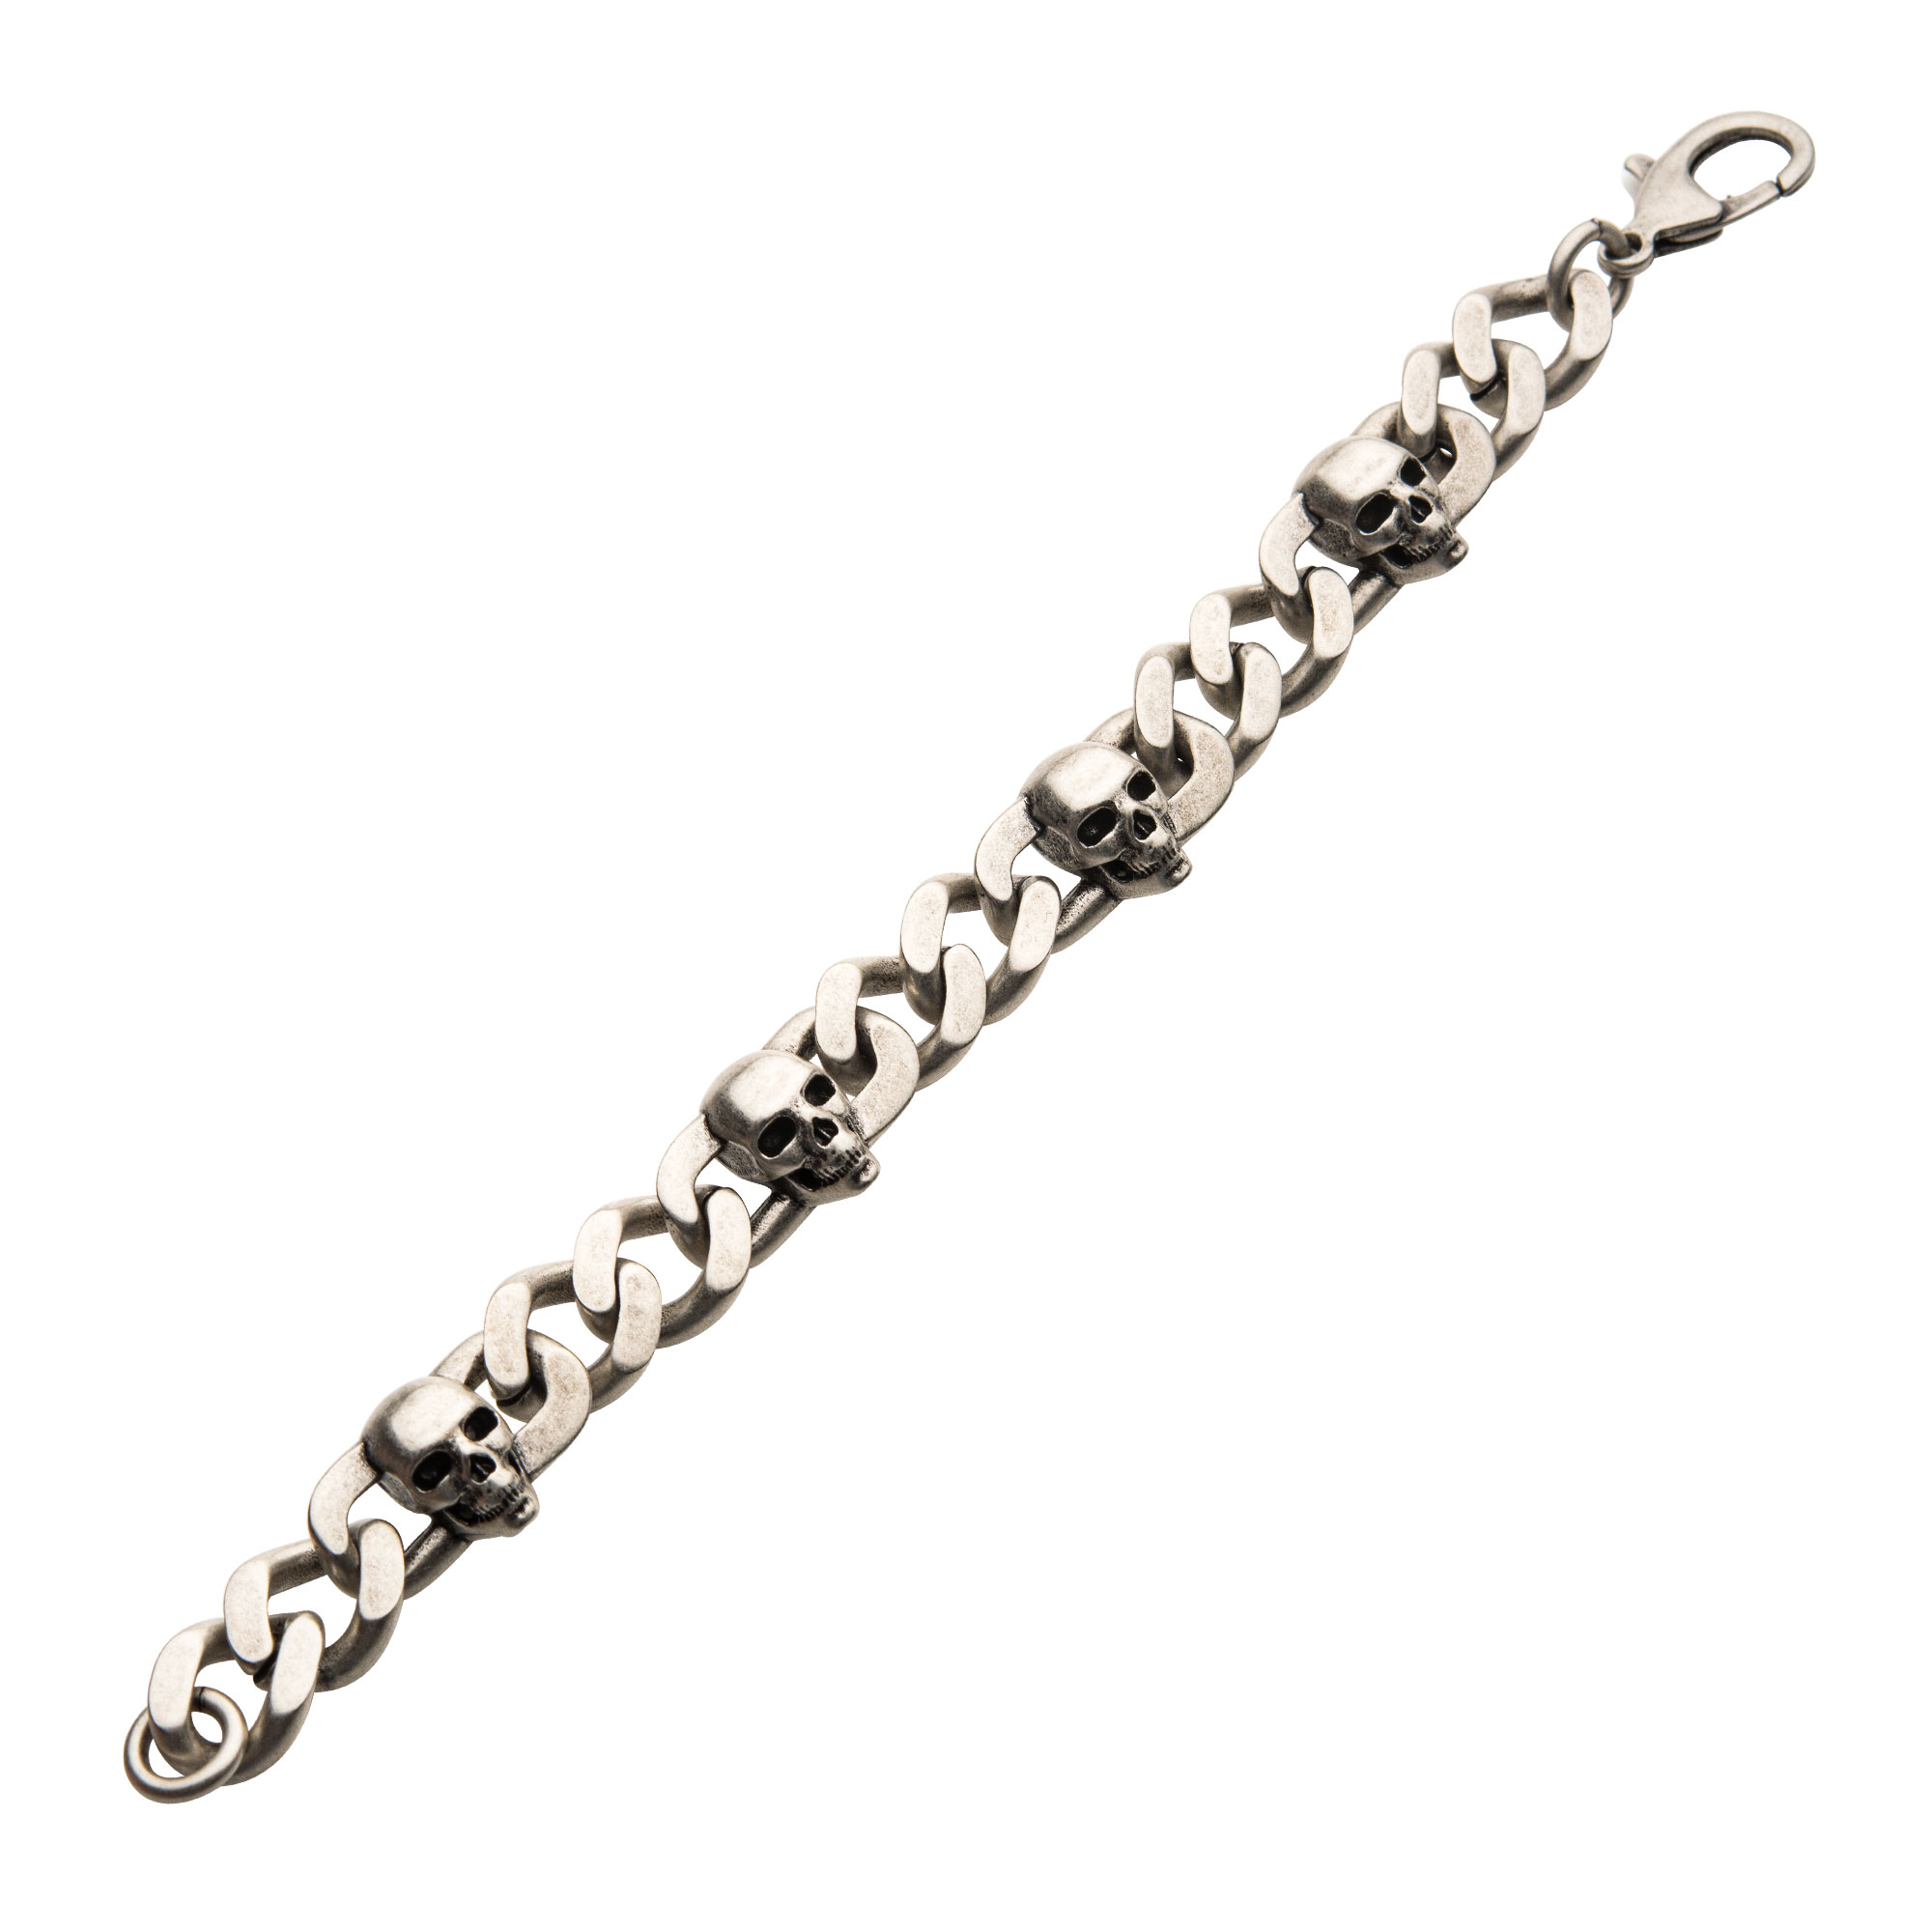 Stainless Steel Silver Plated with Skull Design Chunky Chain Bracelet Image 2 Morin Jewelers Southbridge, MA